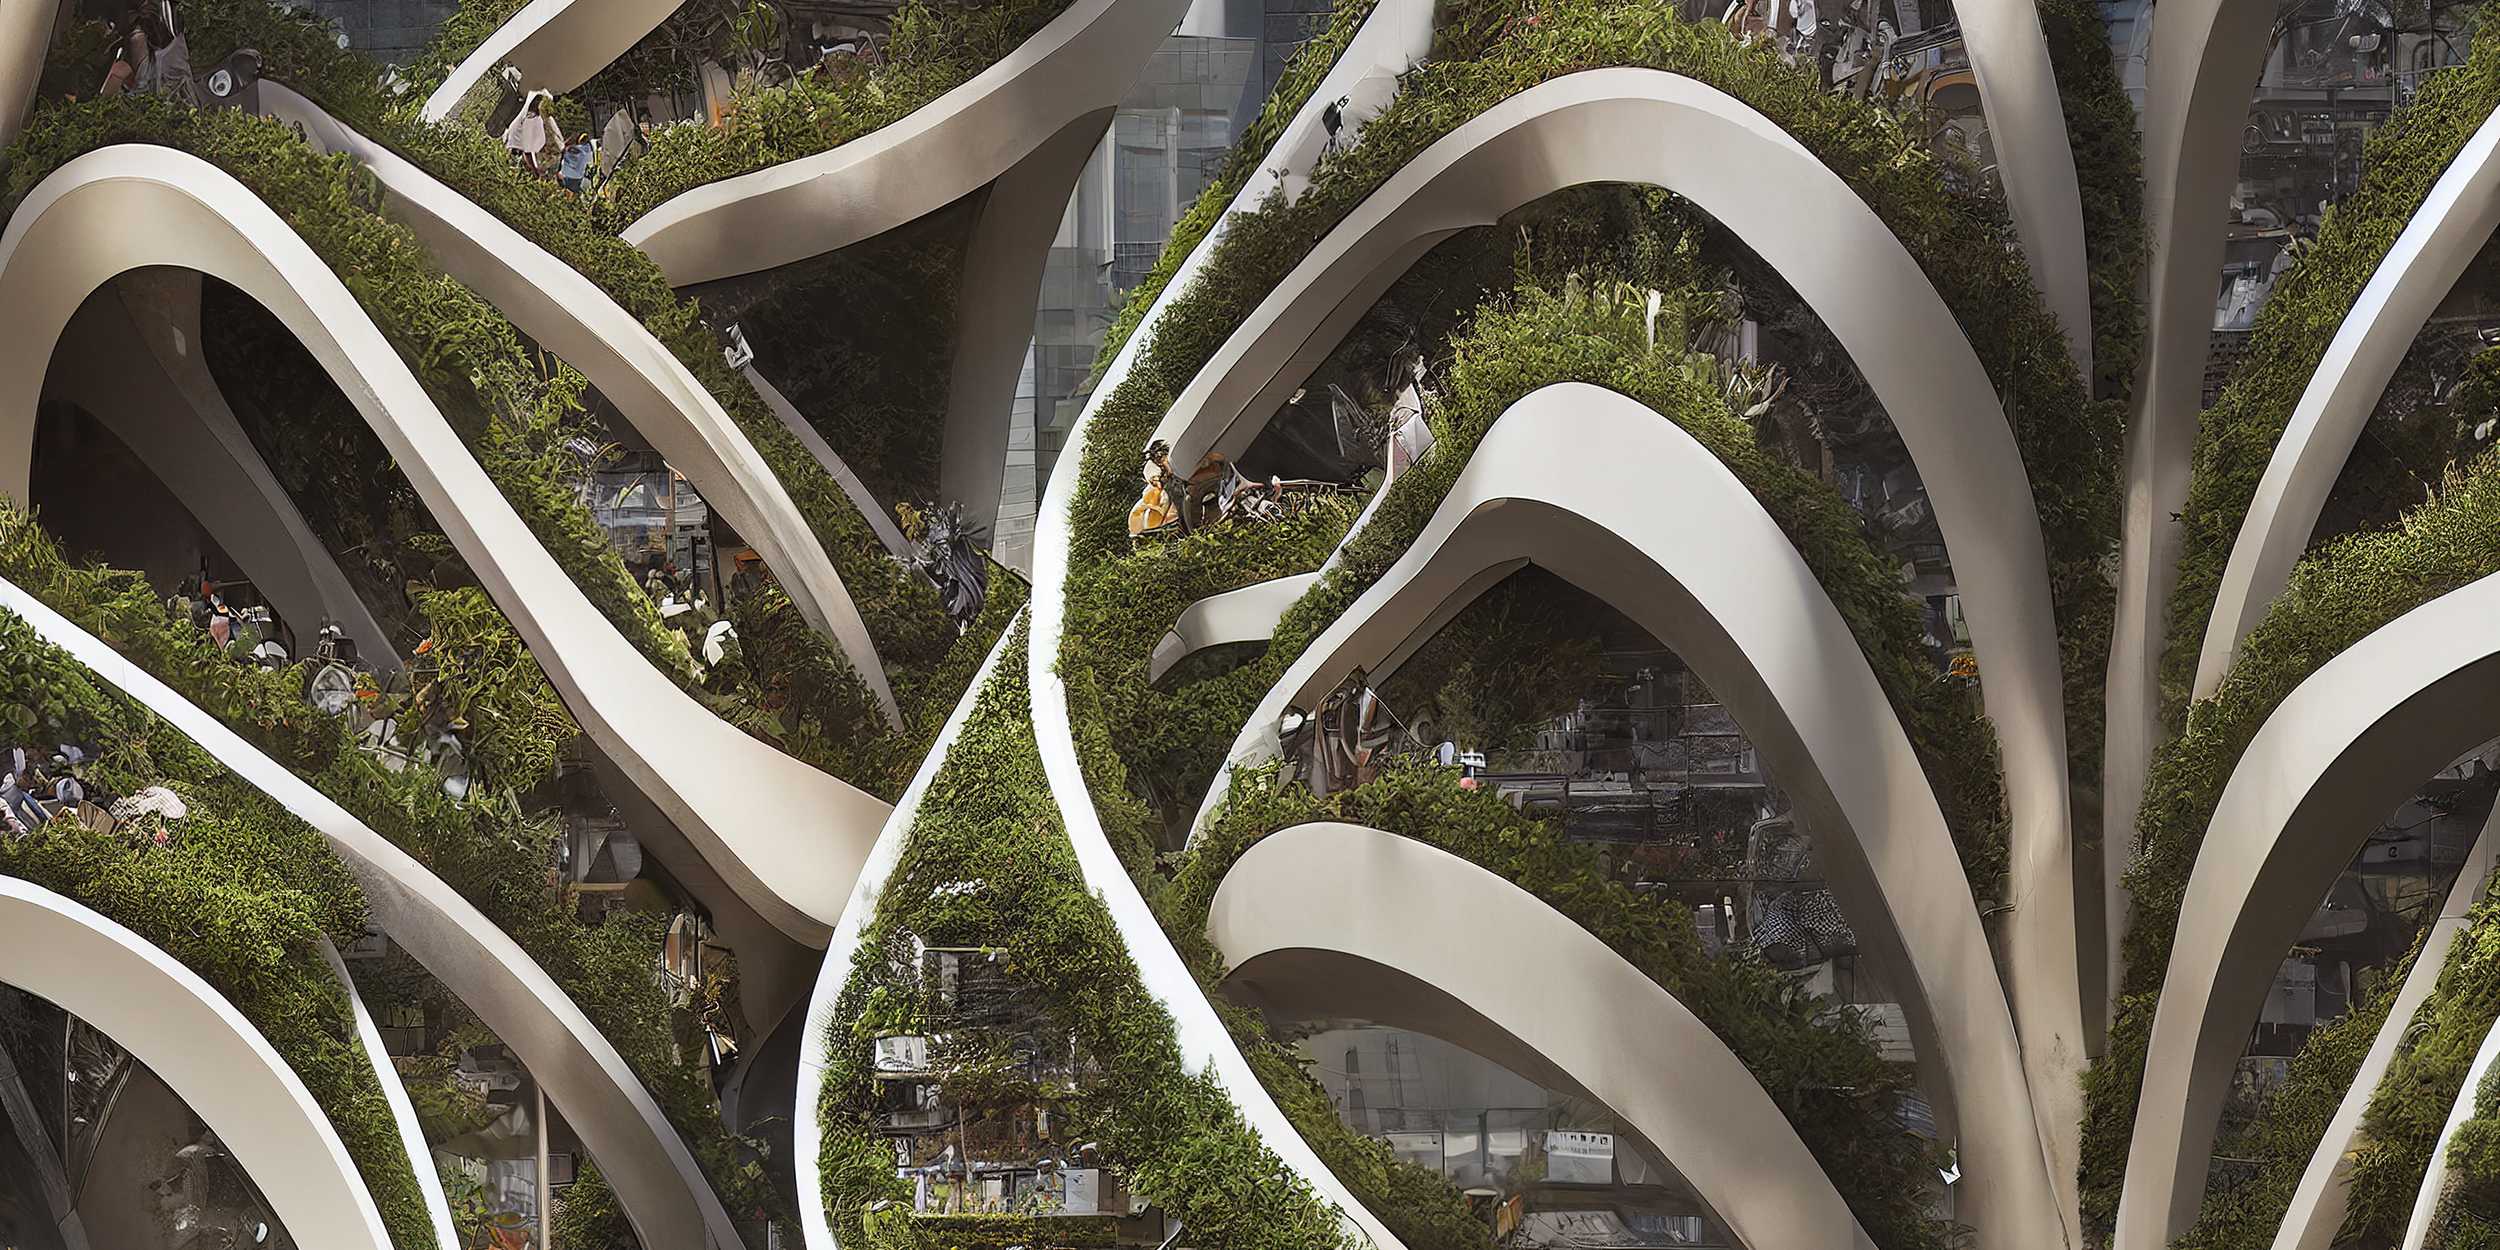 Vision of a green city of the future. (Image: Blue Planet Studio / AdobeStock) 